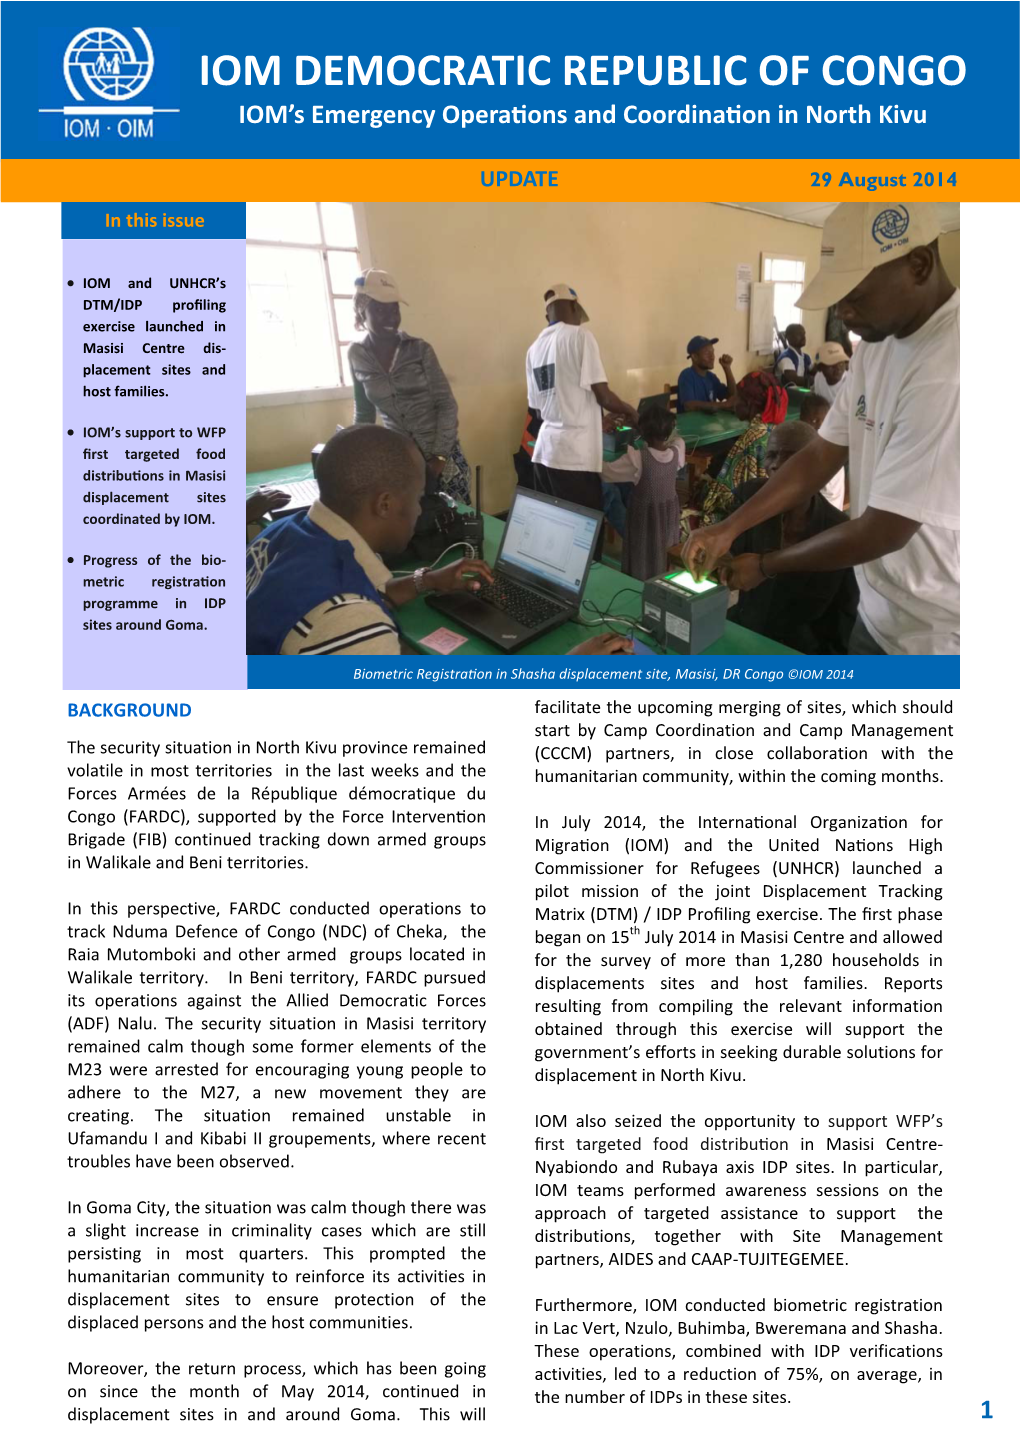 IOM DRC Emergency Operations and Coordination in North Kivu, 29